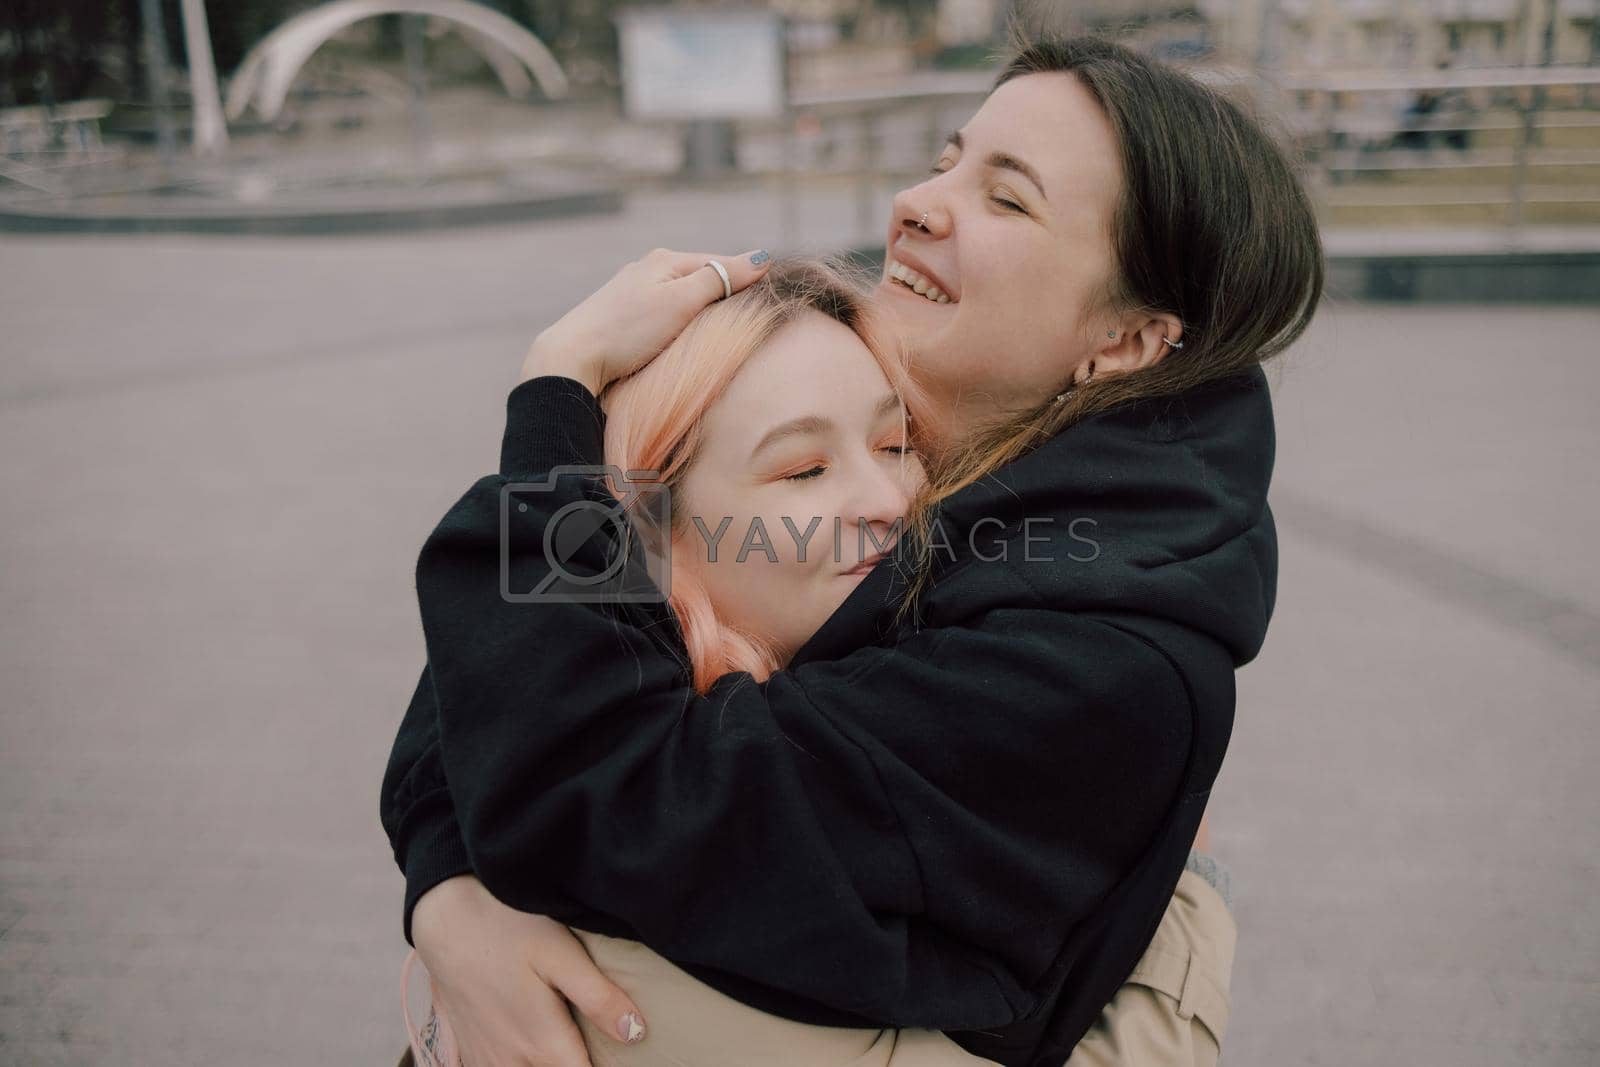 Royalty free image of LGBT Lesbian couple love moments happiness by Symonenko